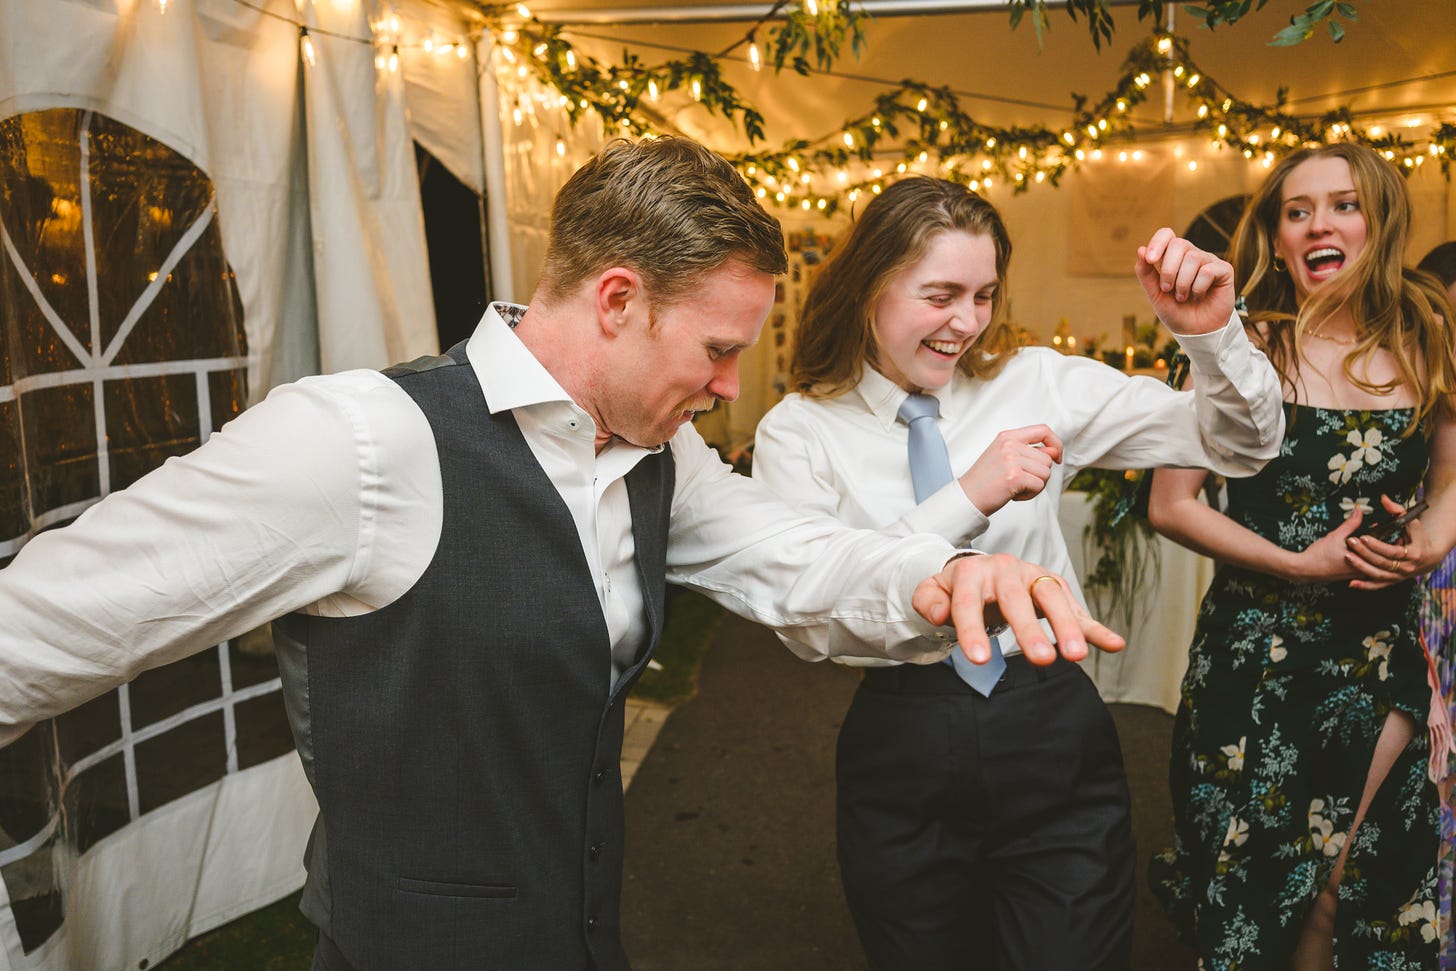 A groom and some guests dancing